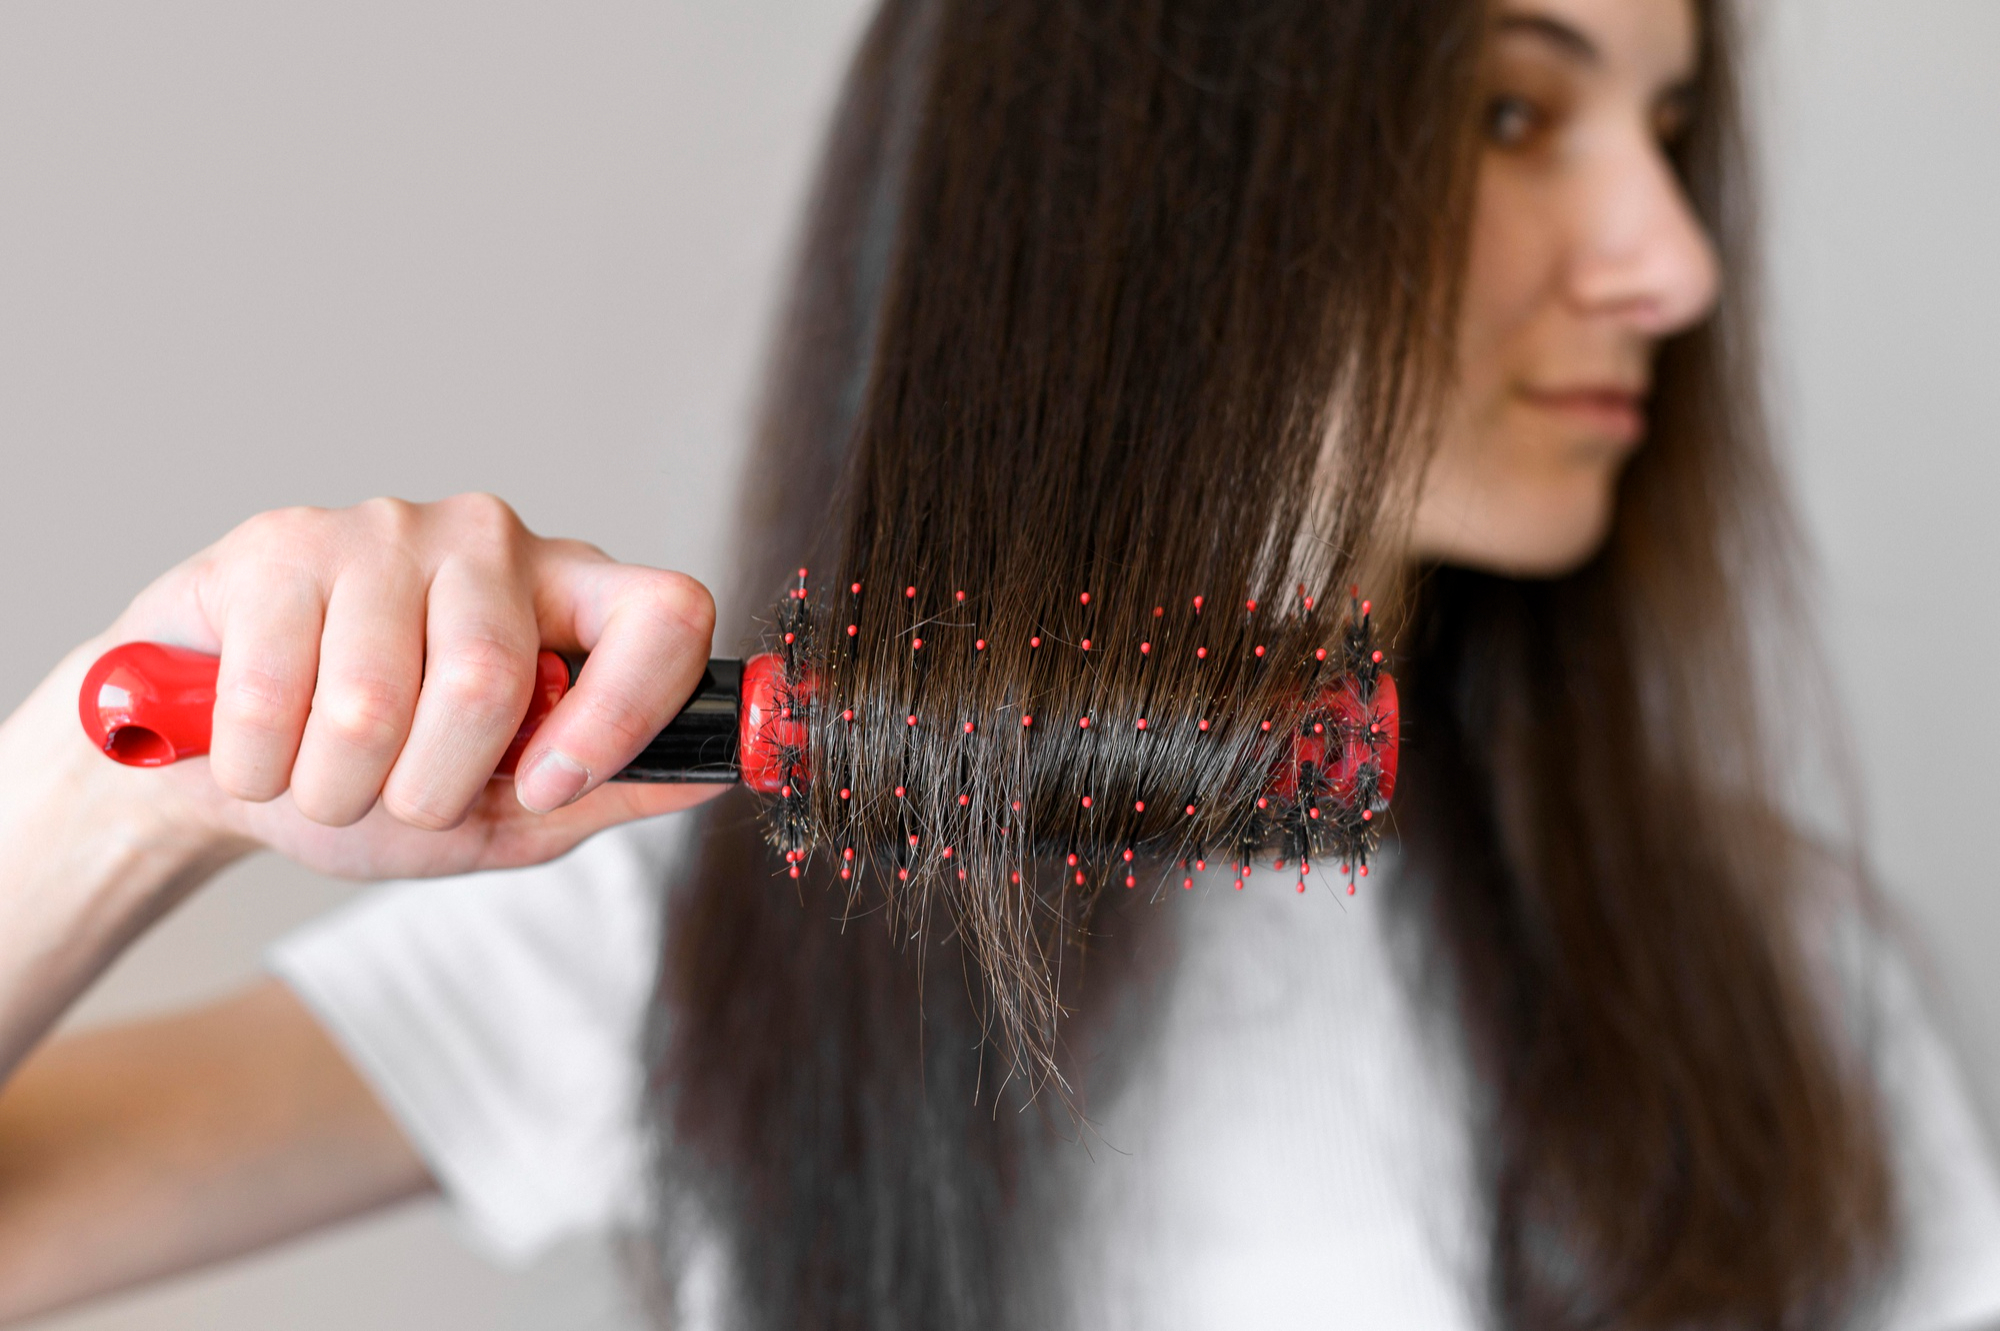 What causes split ends?